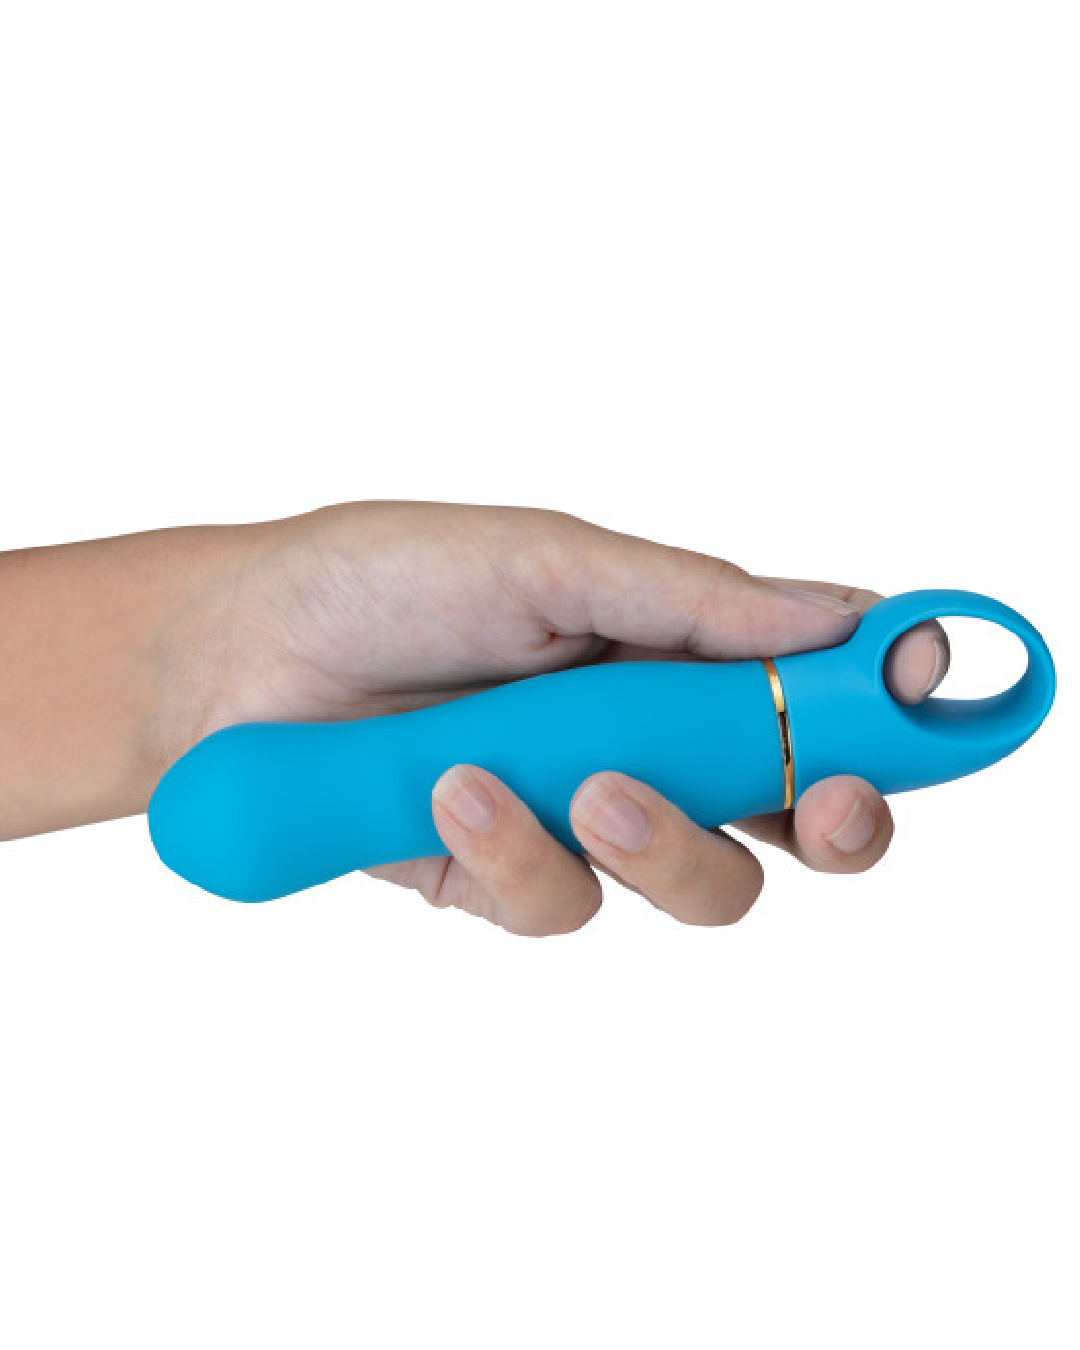 Aria Exciting AF Beginner G-Spot Vibrator - Blue held in model's hand 